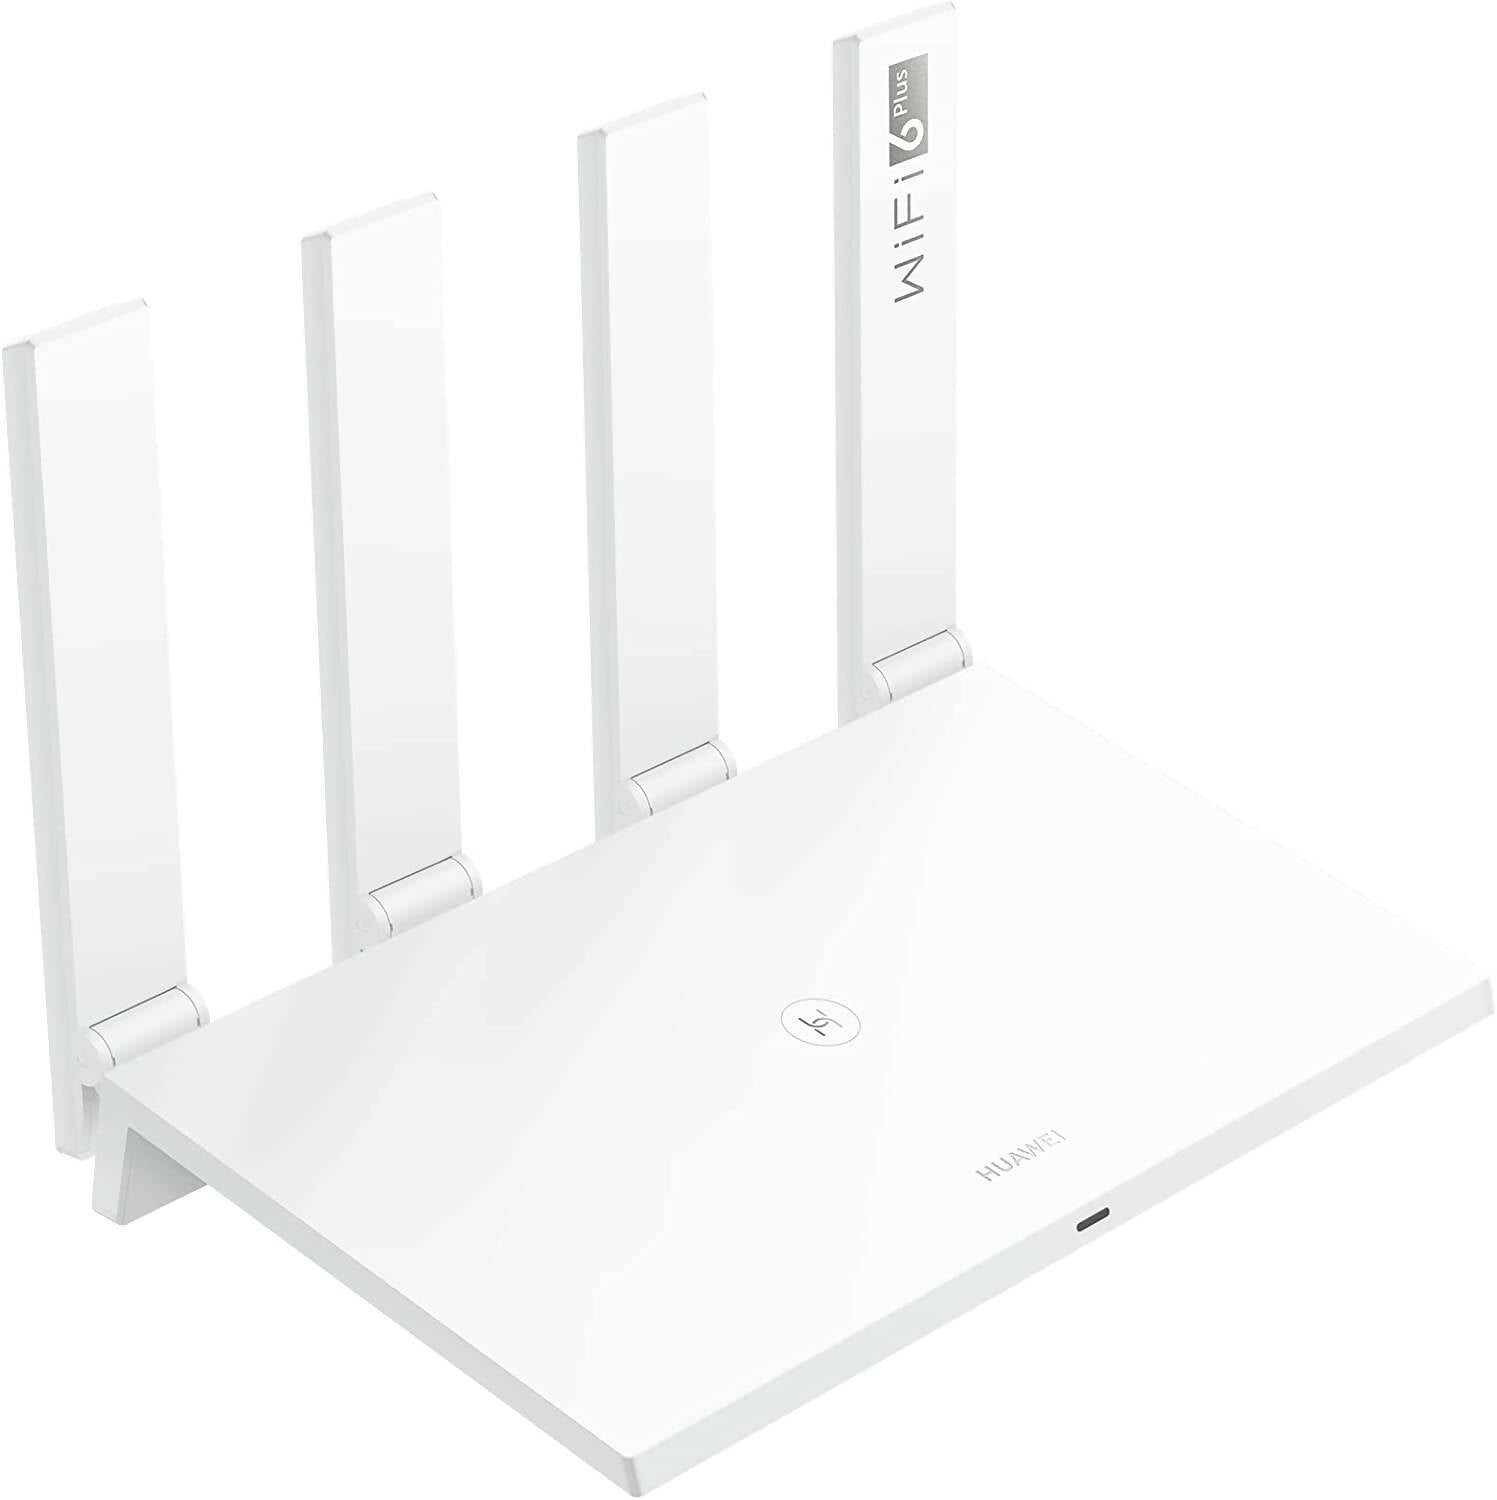 HUAWEI WiFi 6 Plus Smart WiFi Router AX3 Dual-core Wireless Router 3000Mbps 2.4GHz 5GHz Dual